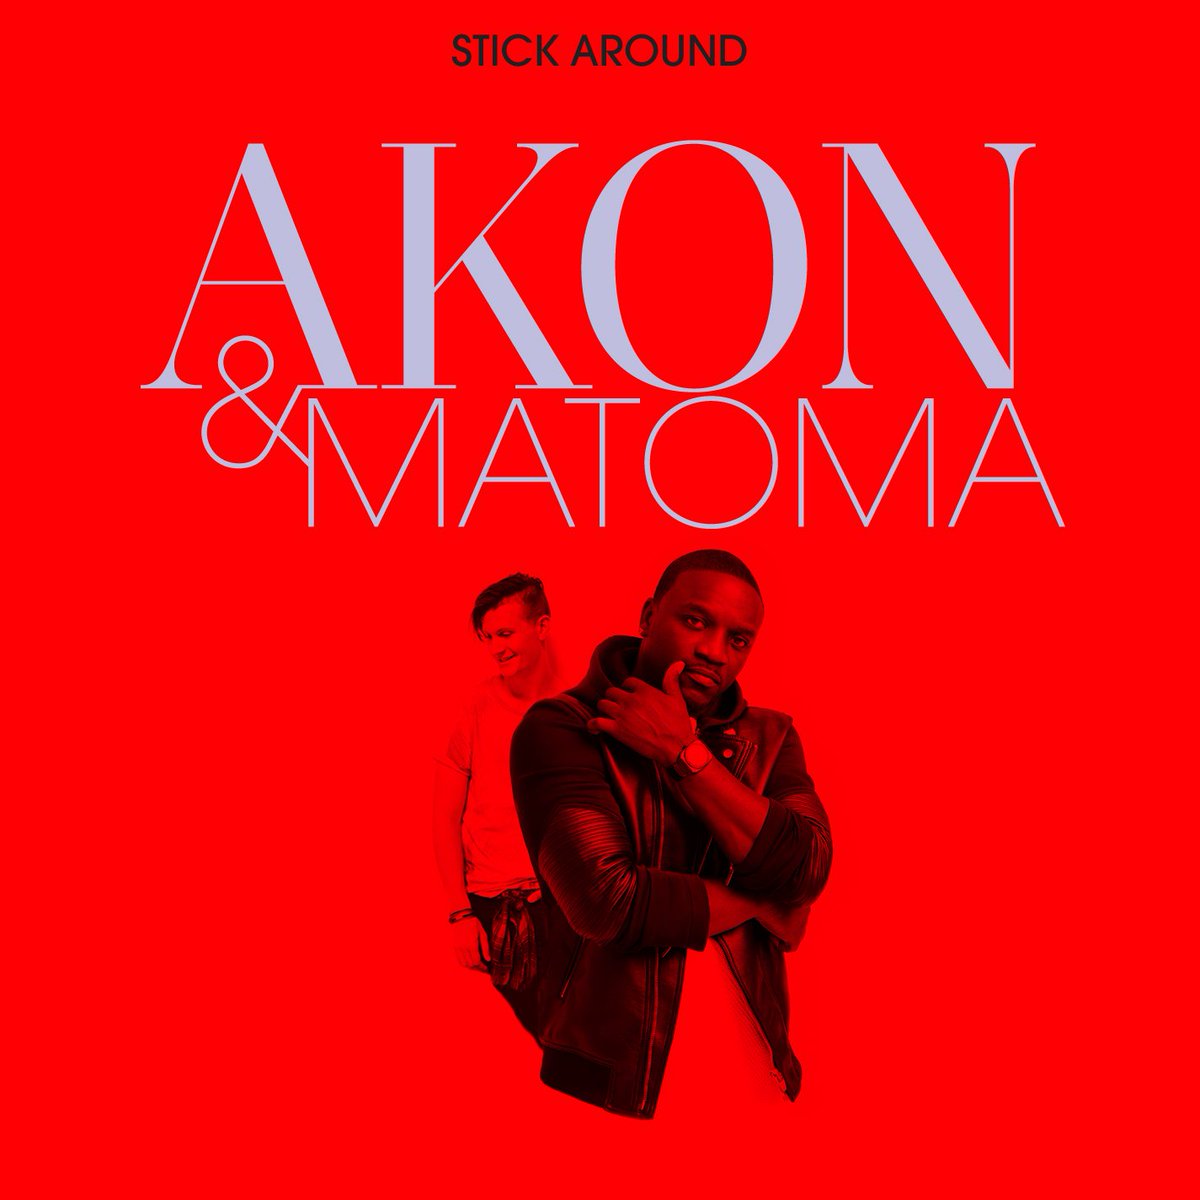 RT @AtlanticRecords: NEW MUSIC: Check out @Akon and @Matoma’s new single “Stick Around” out now! https://t.co/ngy5BNC635 https://t.co/LFMqz…